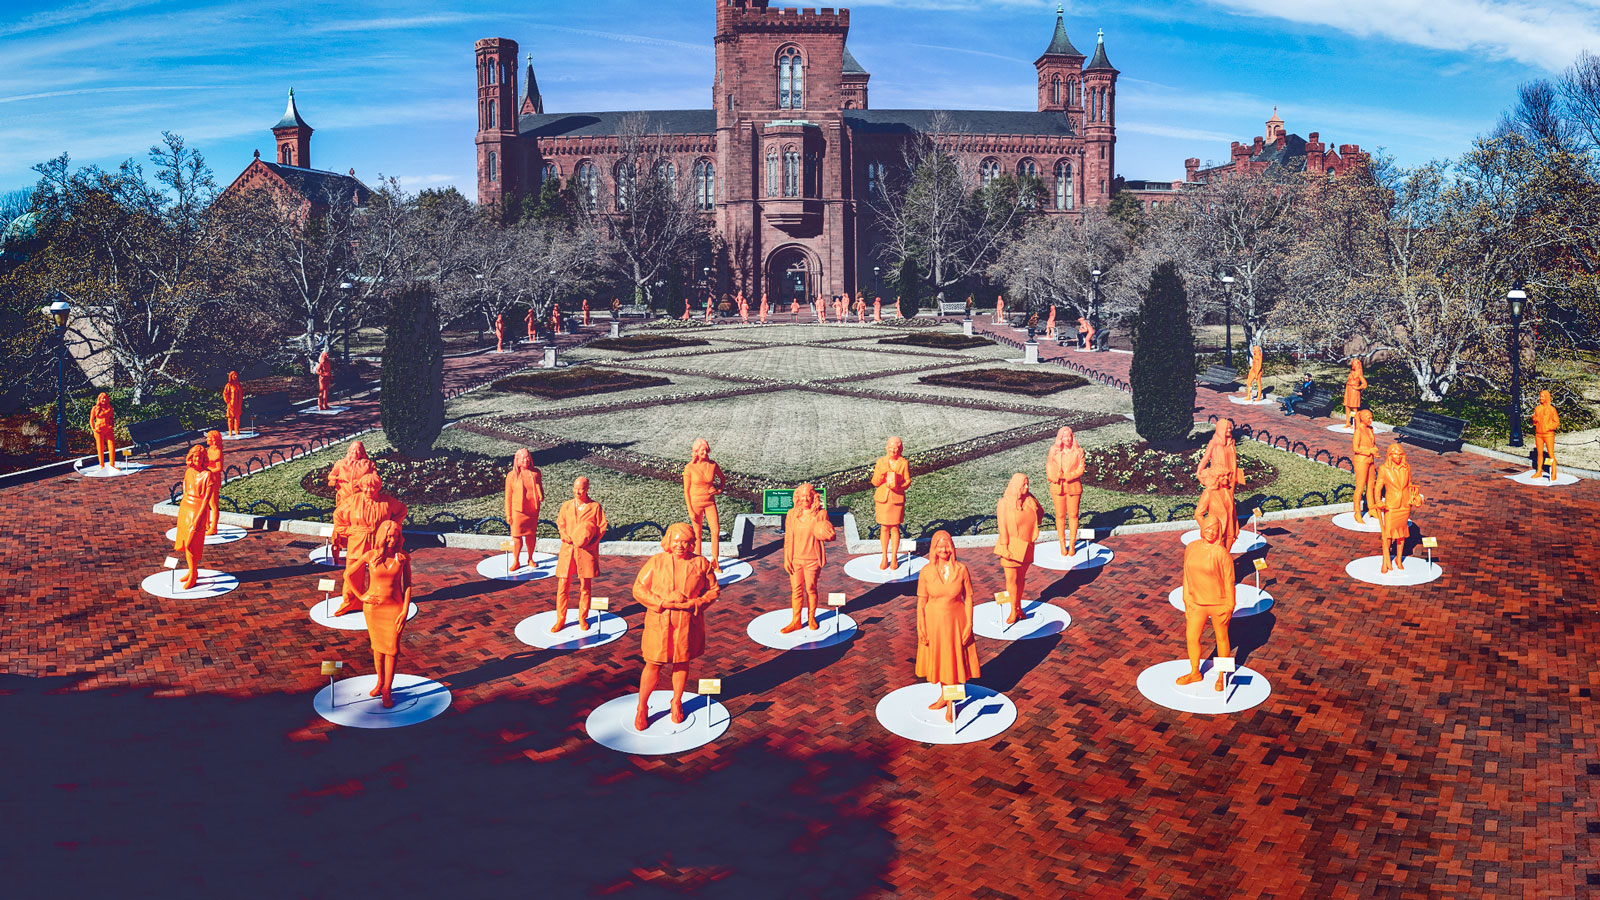 A collection of orange statues of women outside the Smithsonian 'castle'